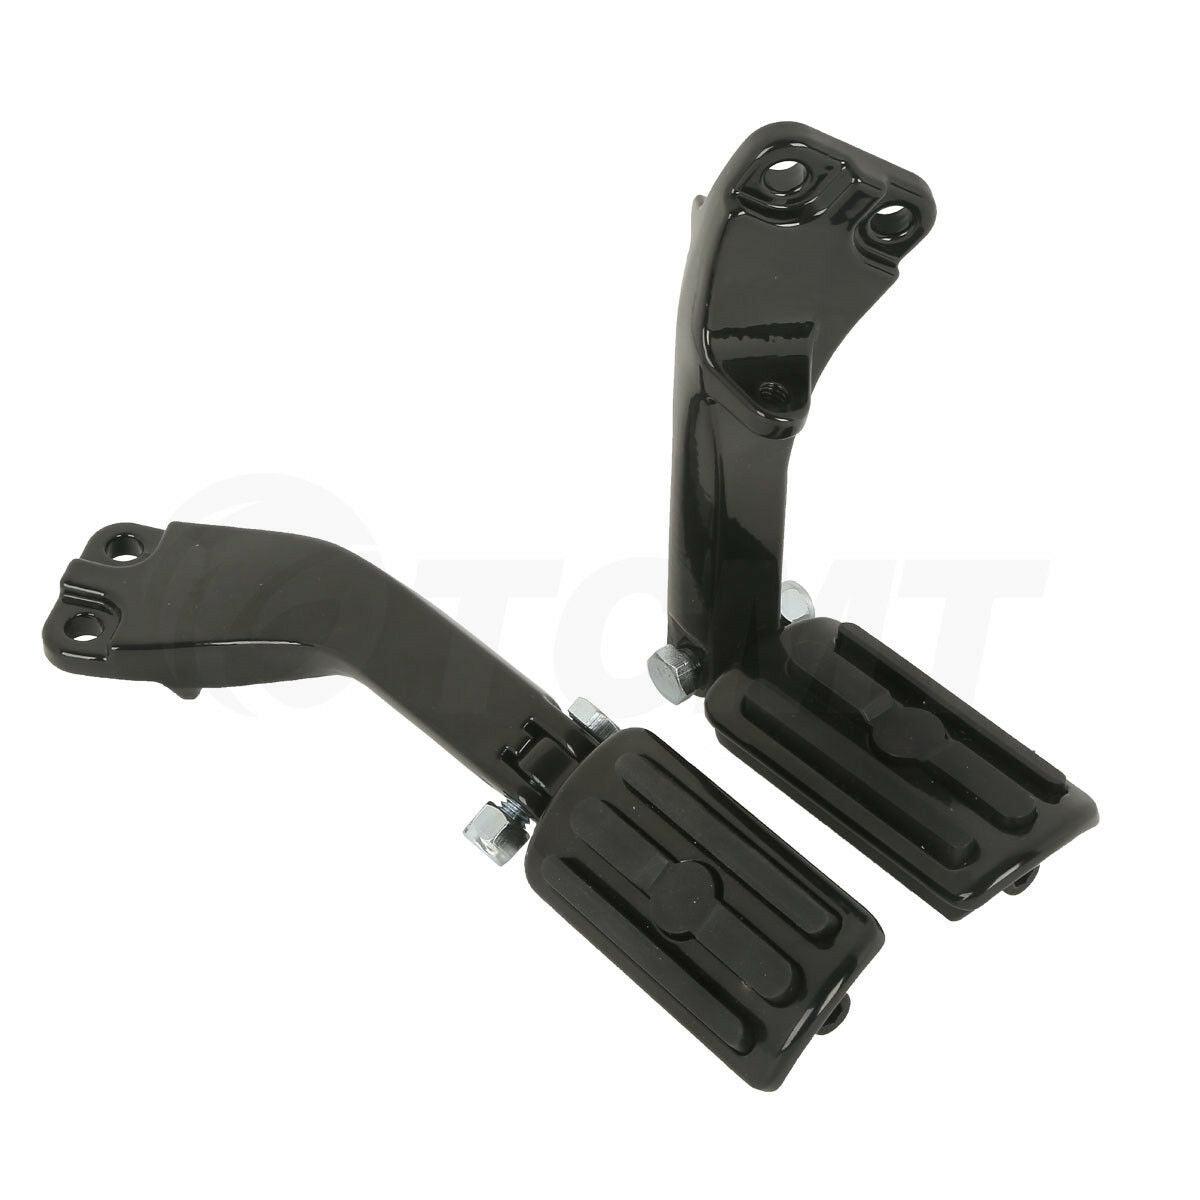 Black Rear Passenger Foot Pegs/Support Mount Fit For Harley Dyna Fat Bob 08-16 - Moto Life Products